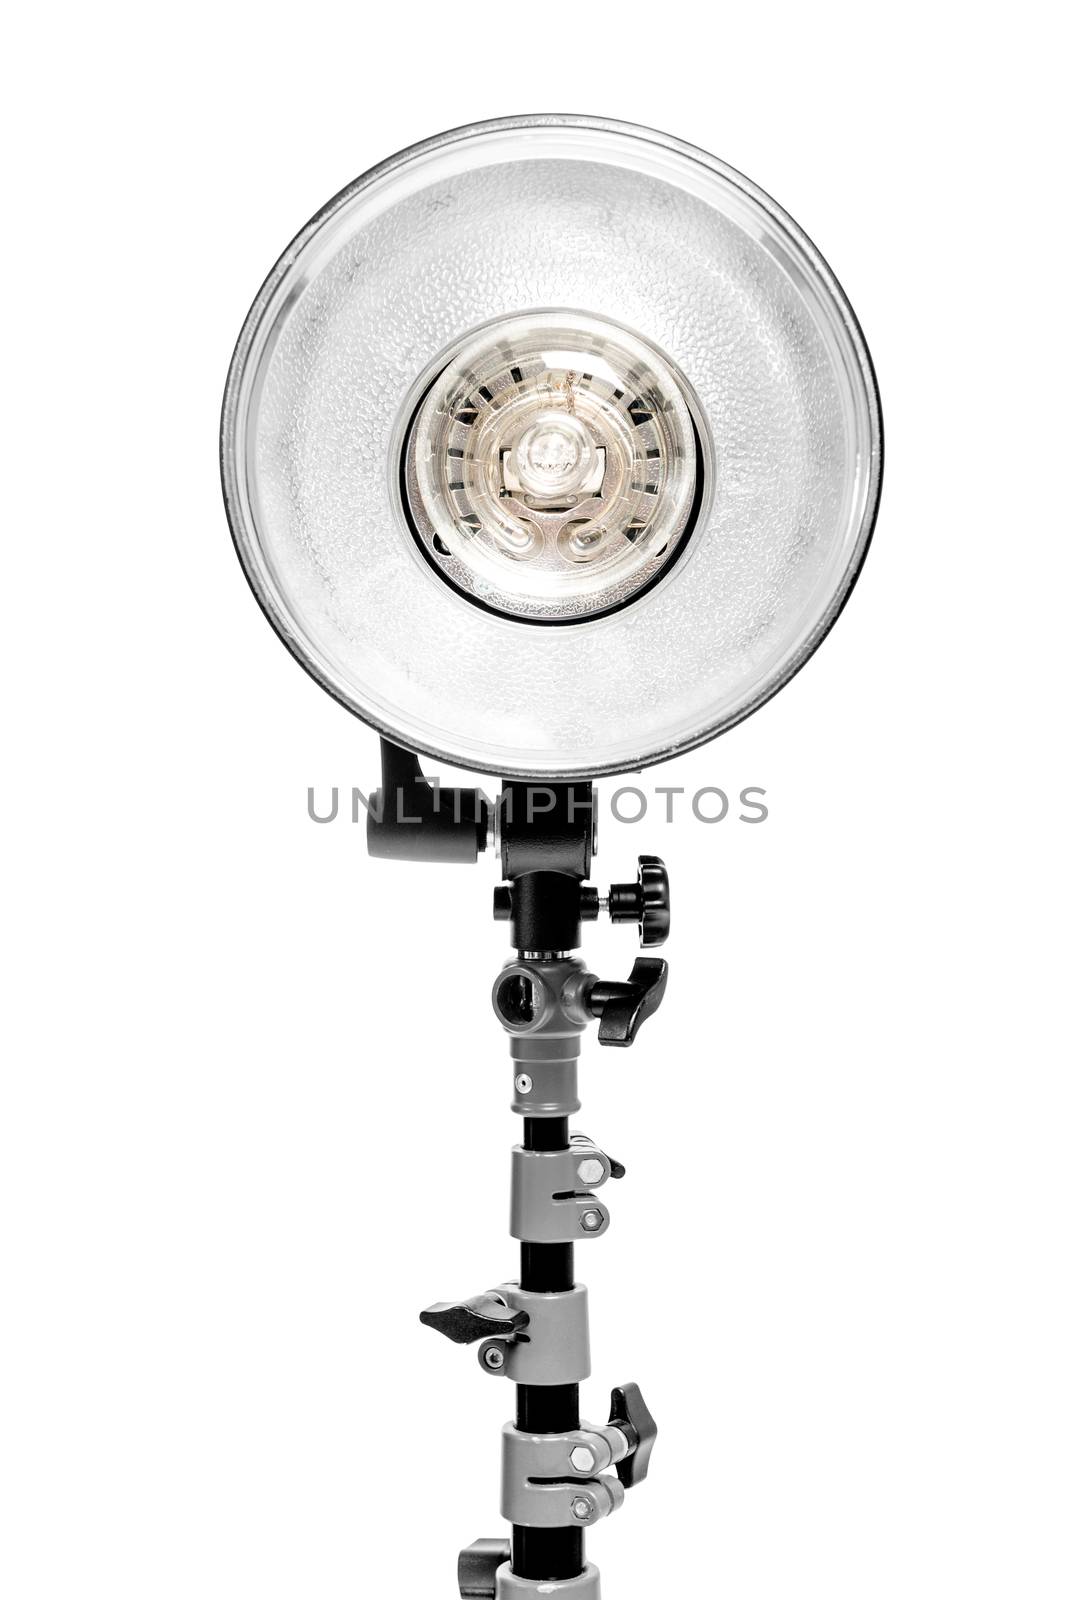 powerful photo flash lamp on rack on white background in studio close up